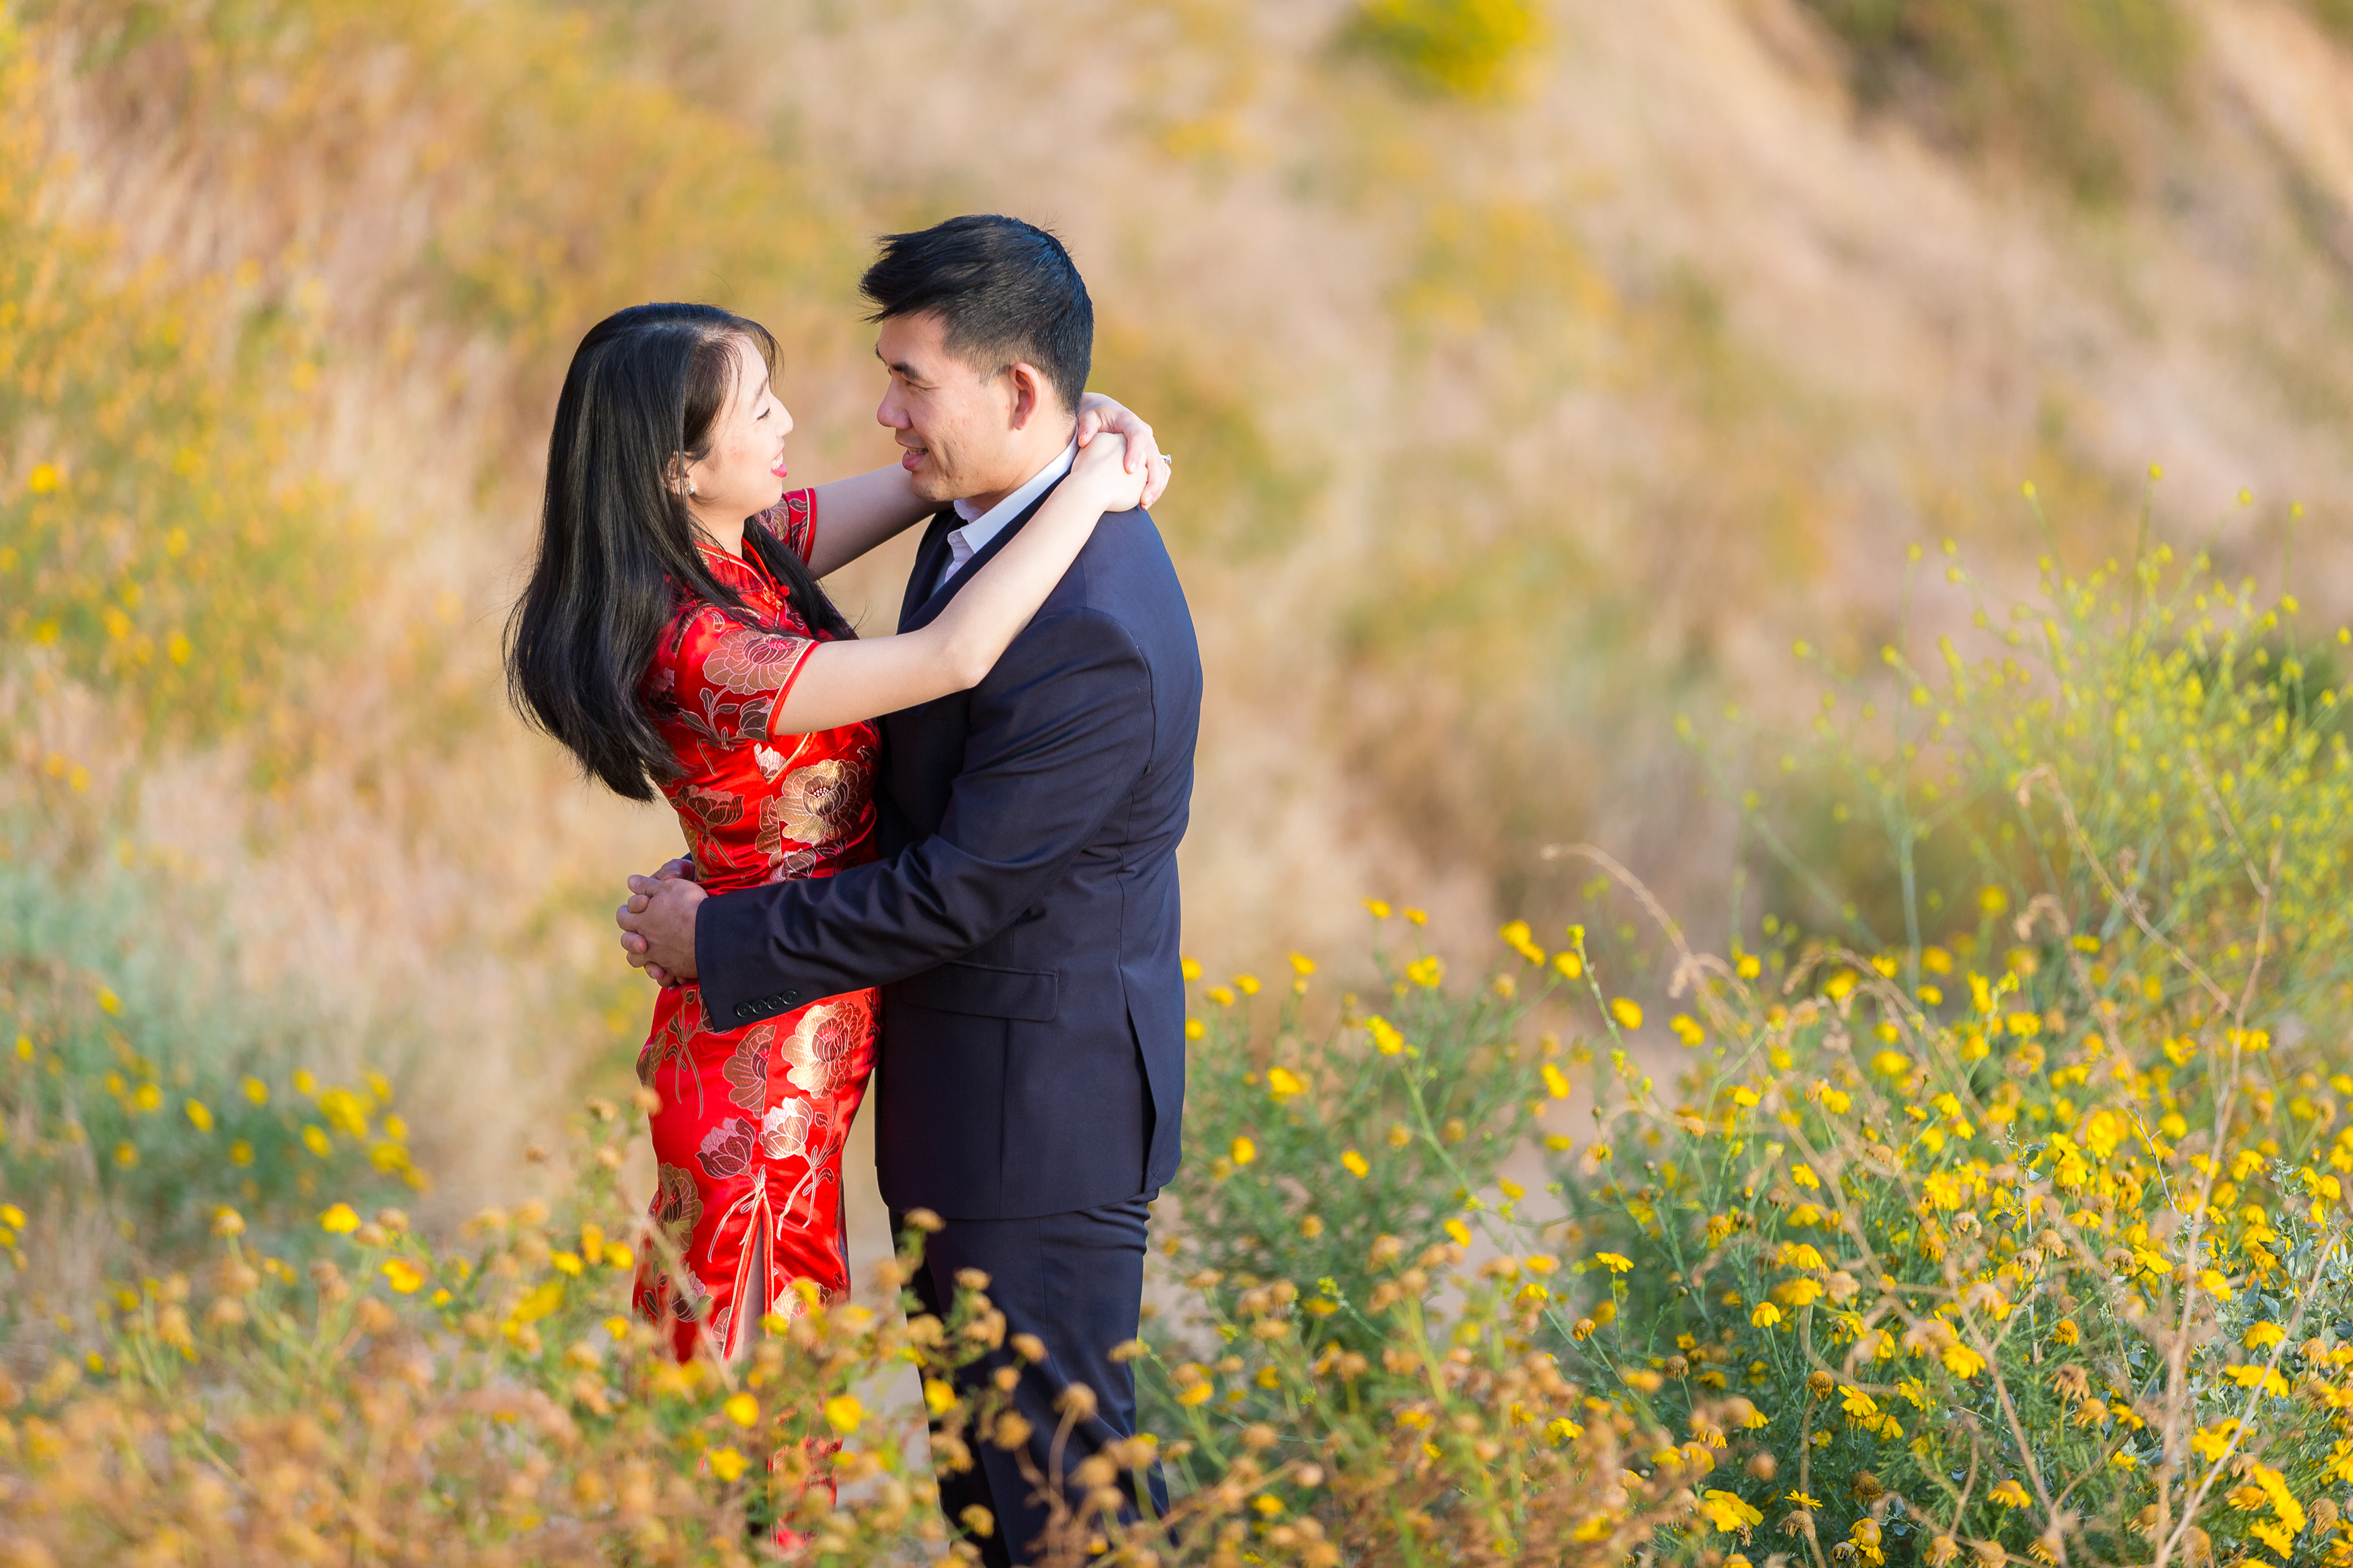 Engaged couple in traditional Chinese dress hugging in field of yellow flowers